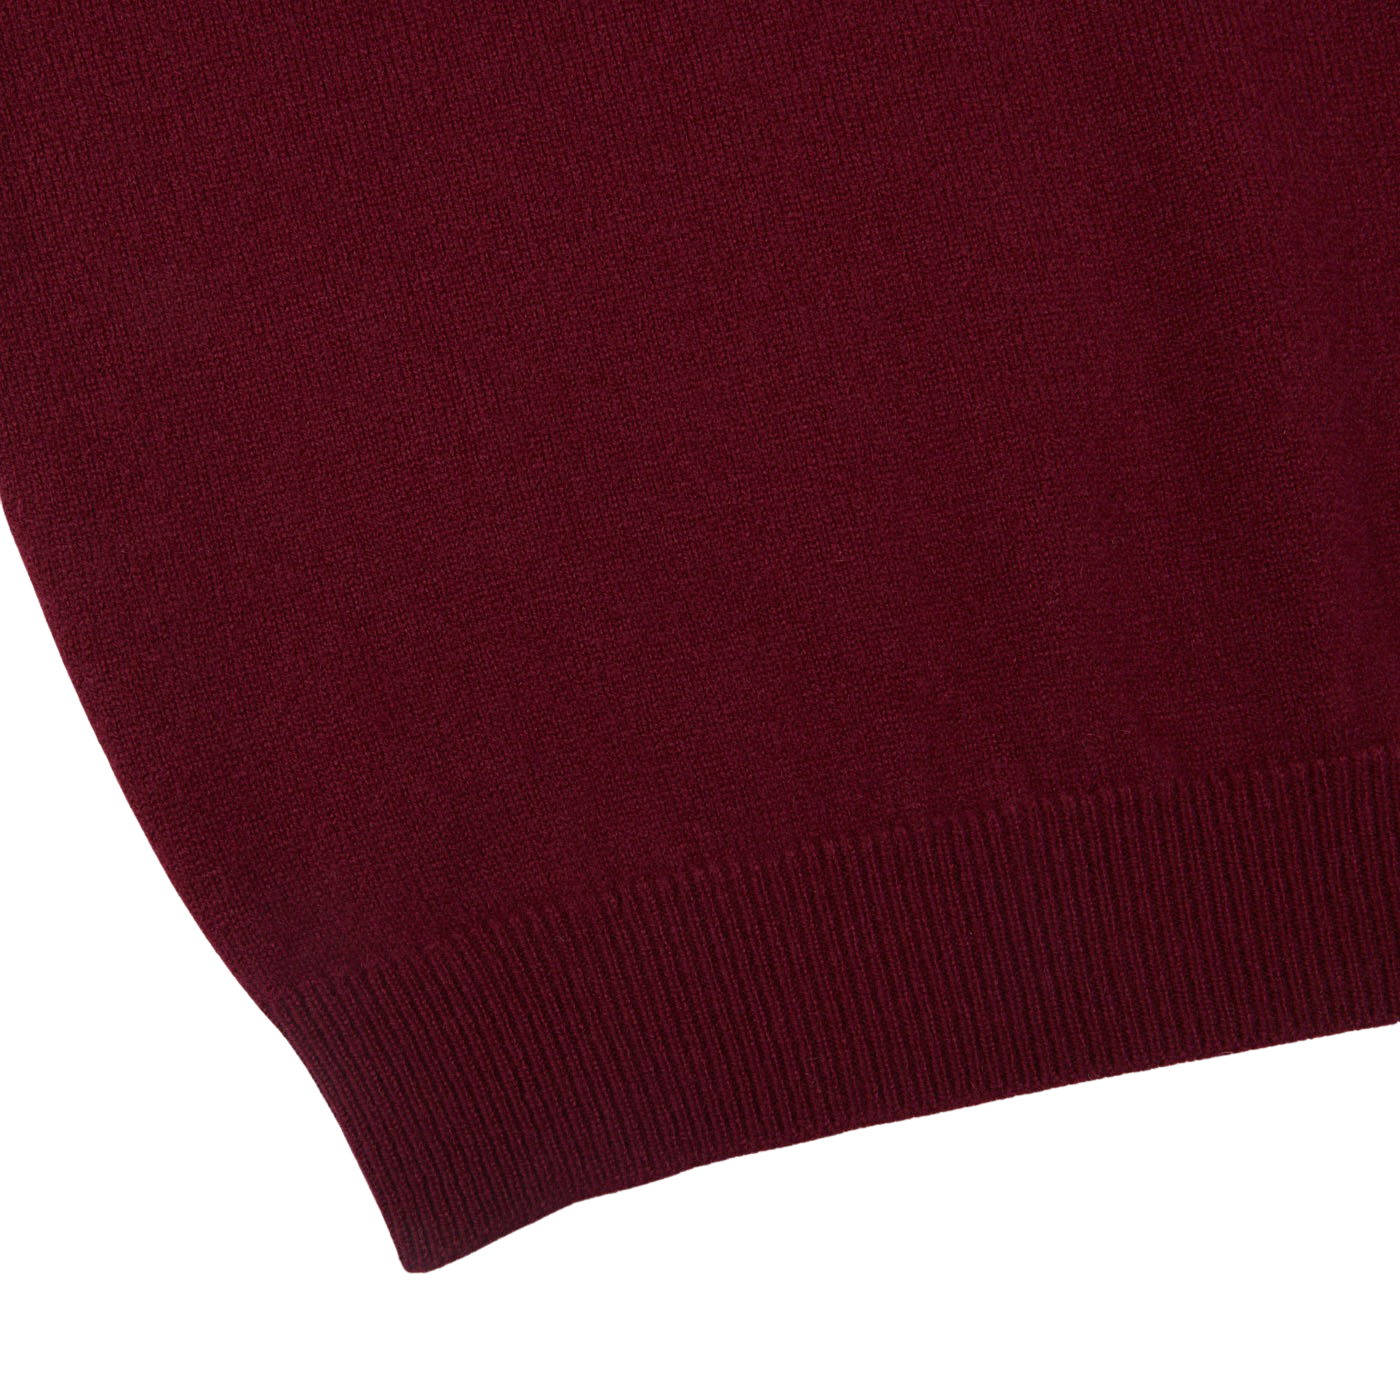 A close up of a comfy William Lockie Bordeaux V-neck lambswool sweater.